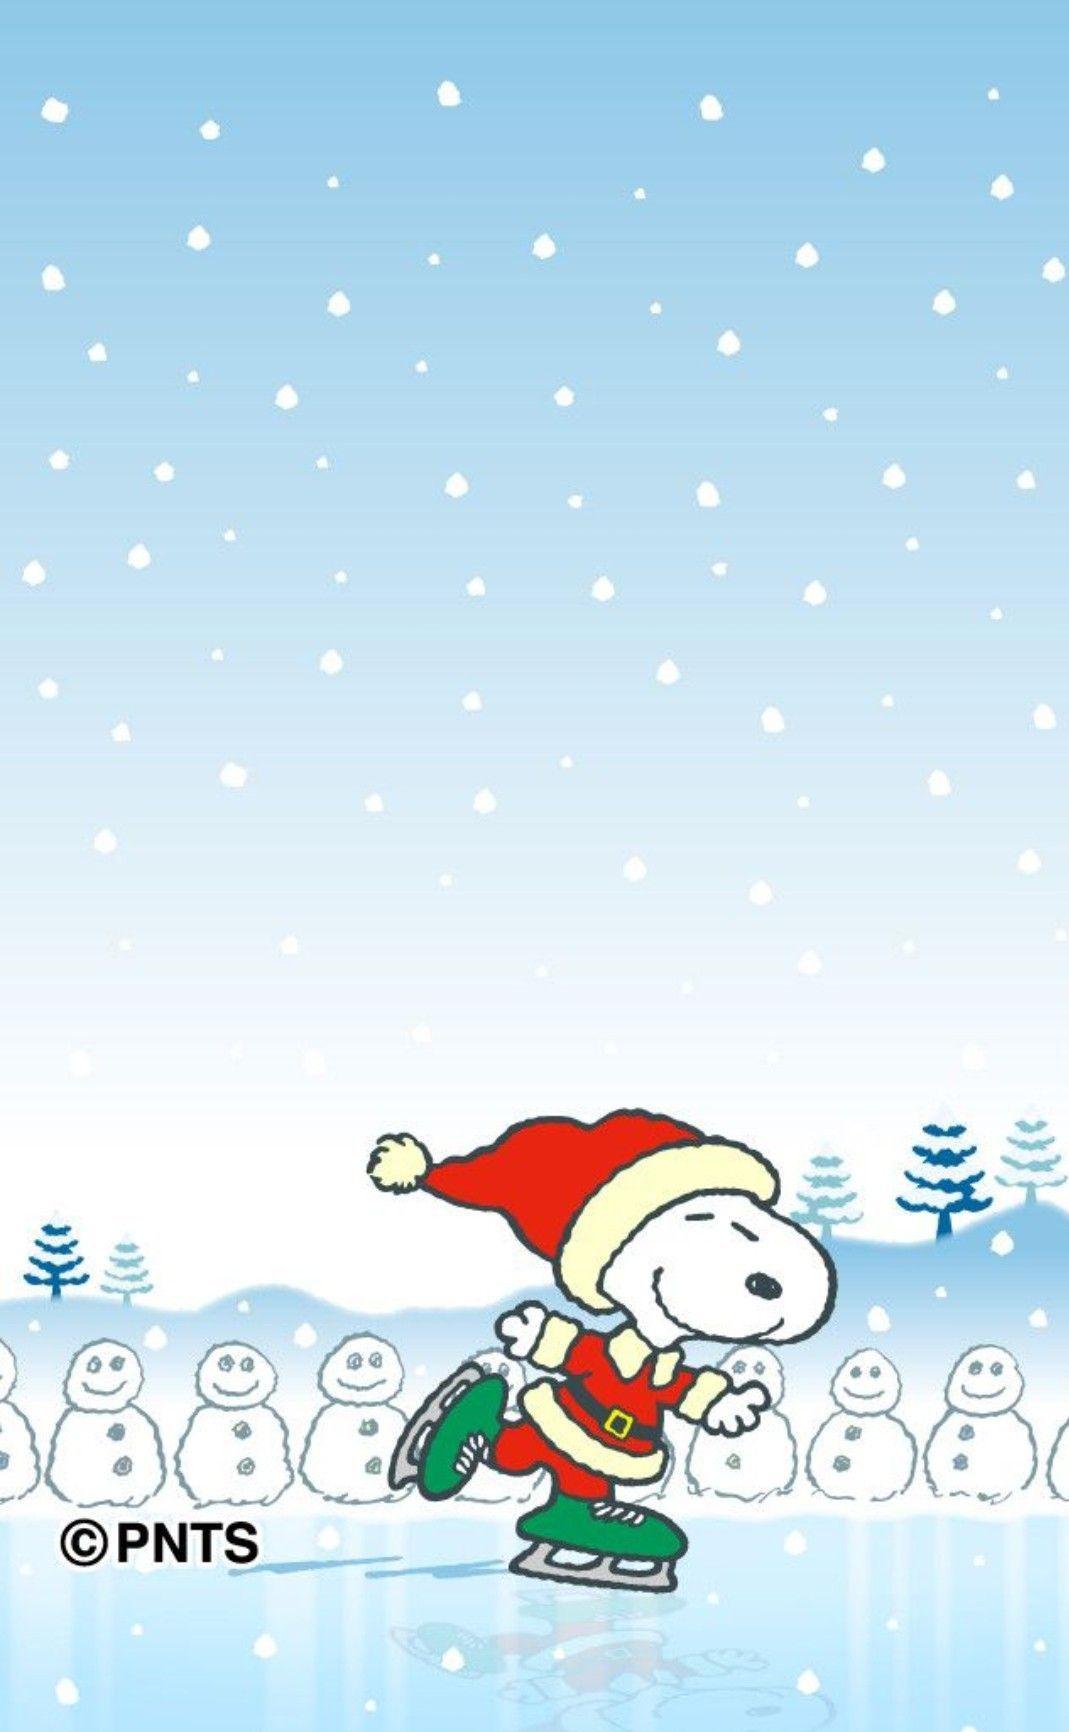 Snoopy Christmas iPhone Wallpaper Free Snoopy